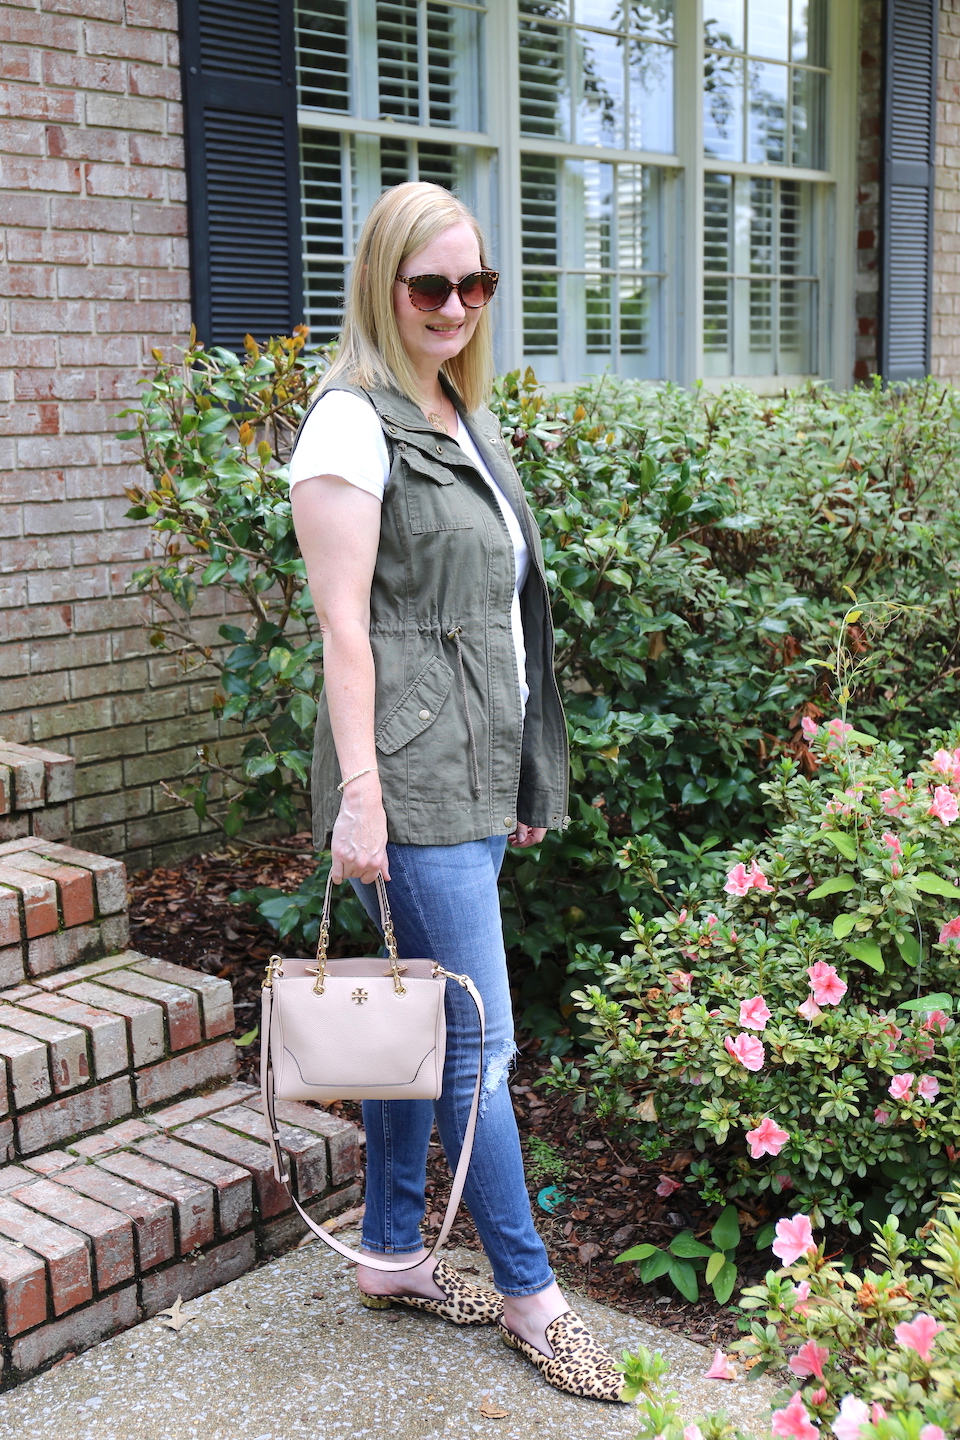 Olive Leopard and Blush - This fall outfit includes a white tee, olive utility vest, distressed jeans, blush satchel bag and leopard mules